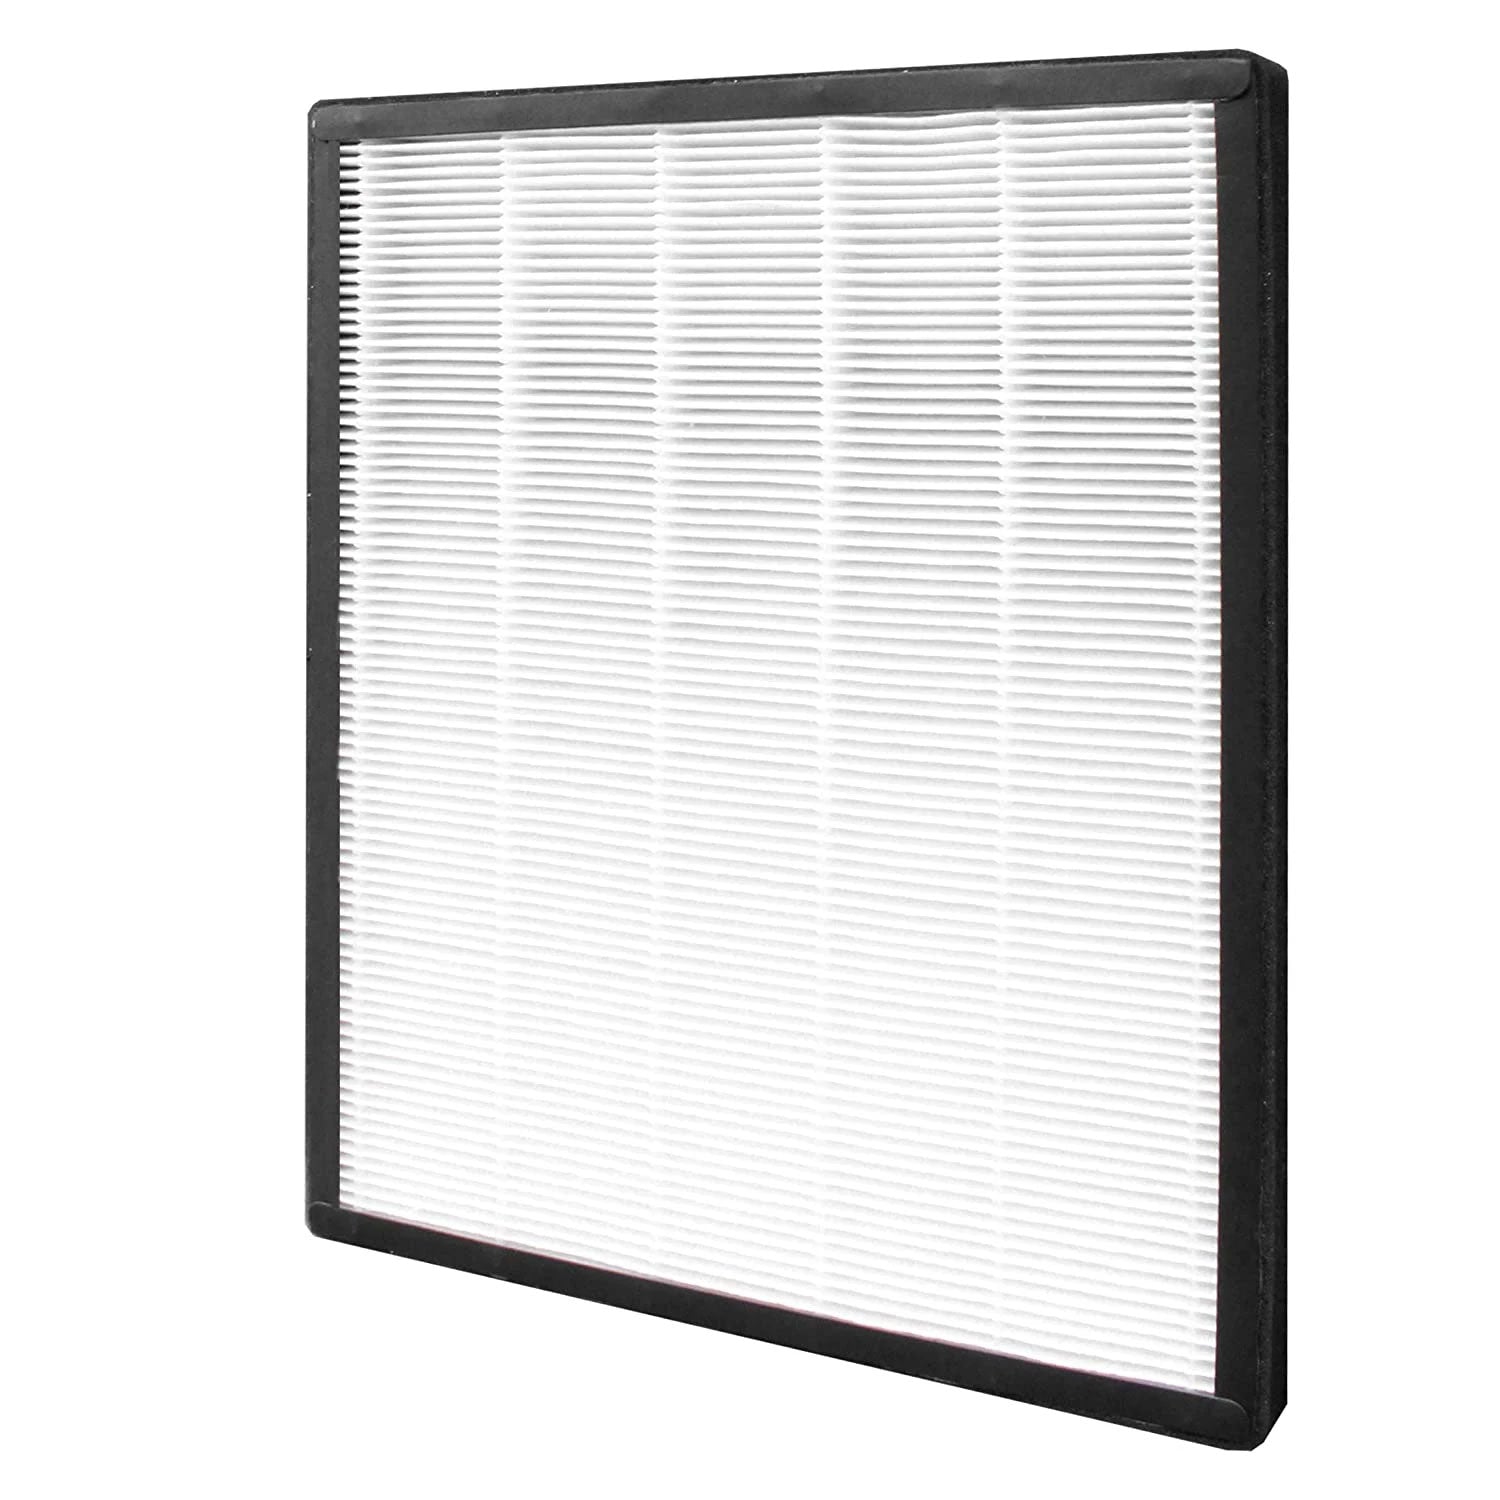 Climestar Compatible Replacement for Levoit Air Purifier LV-PUR131 Filter,  Part LV-PUR131-RF - Includes 1